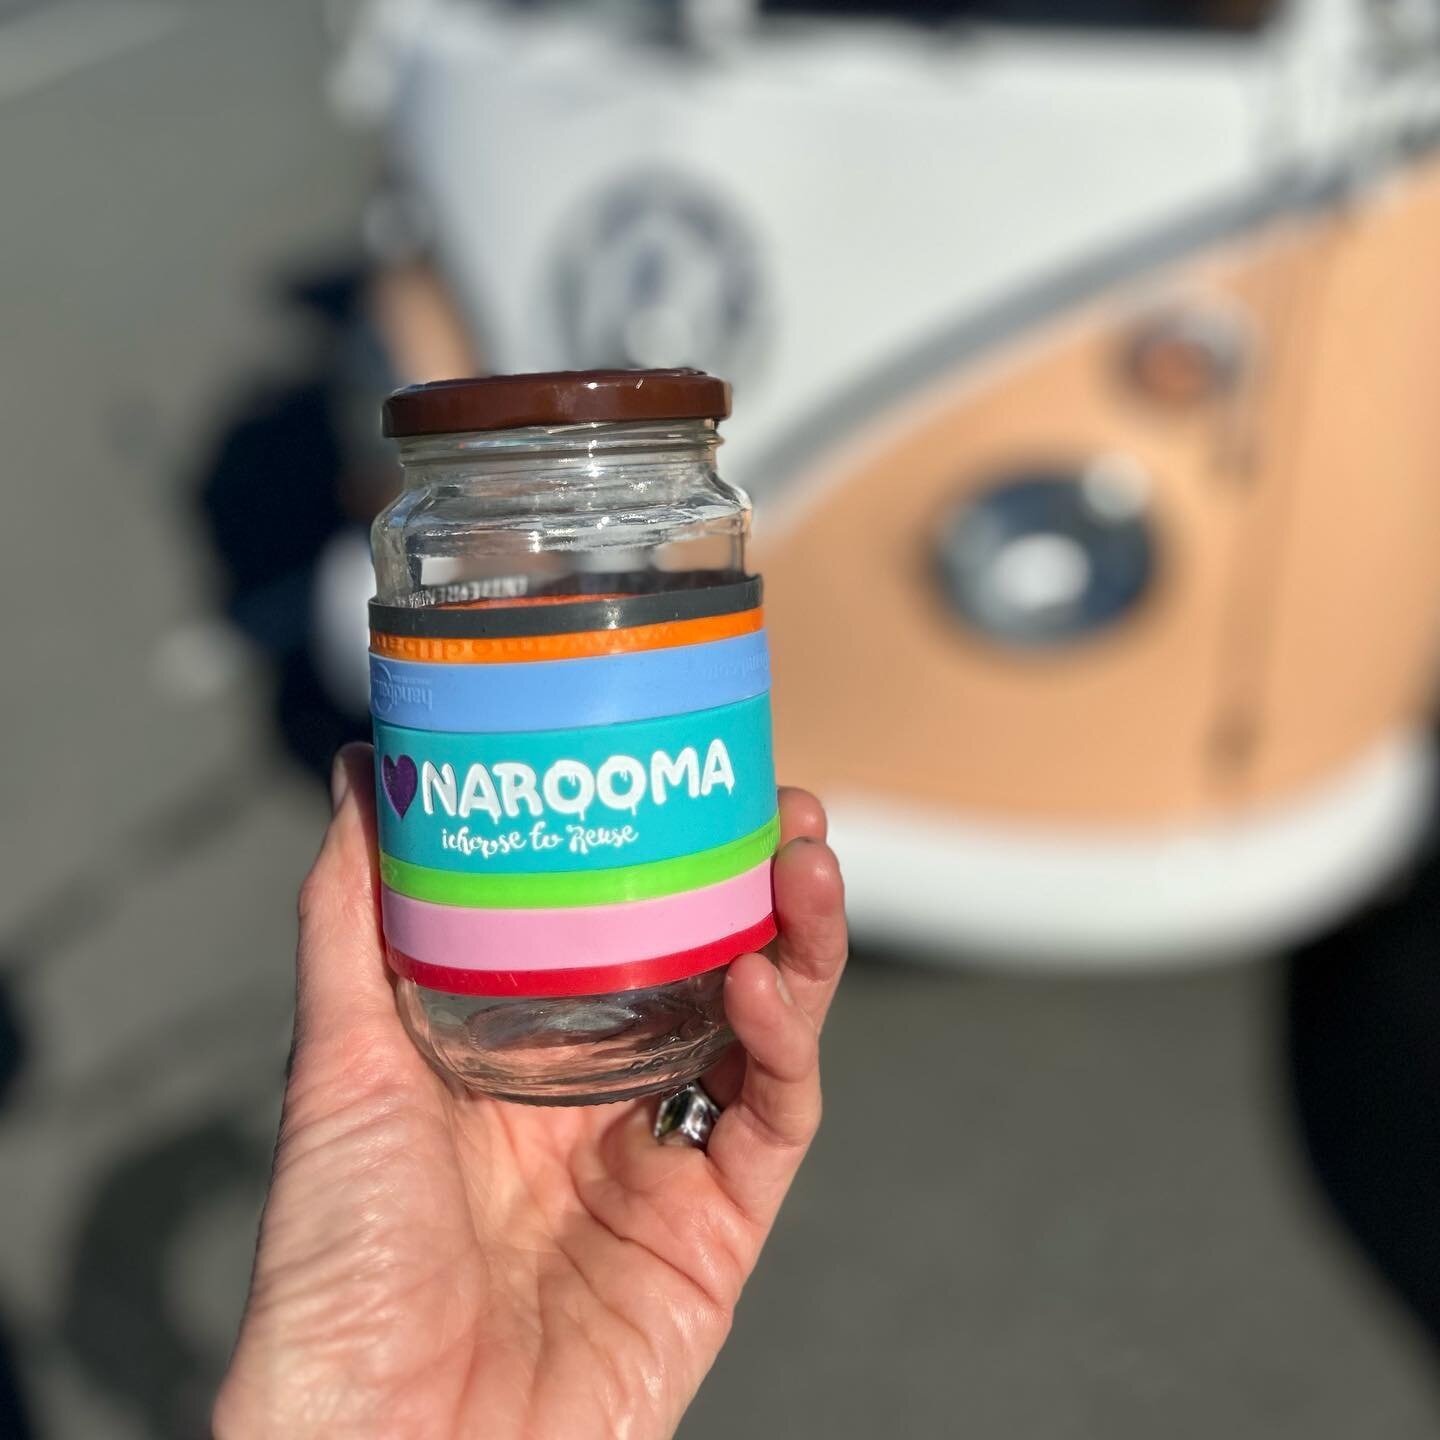 Something for mum? Get a colourful keepie cup, personalised with her fave brew - upcycled coffee jars, with silicon bands diverted from landfill (@handband ) available from @sbcnarooma - @responsiblecafes #imnomug #choosetoreuse #jarwars #mugshot #re